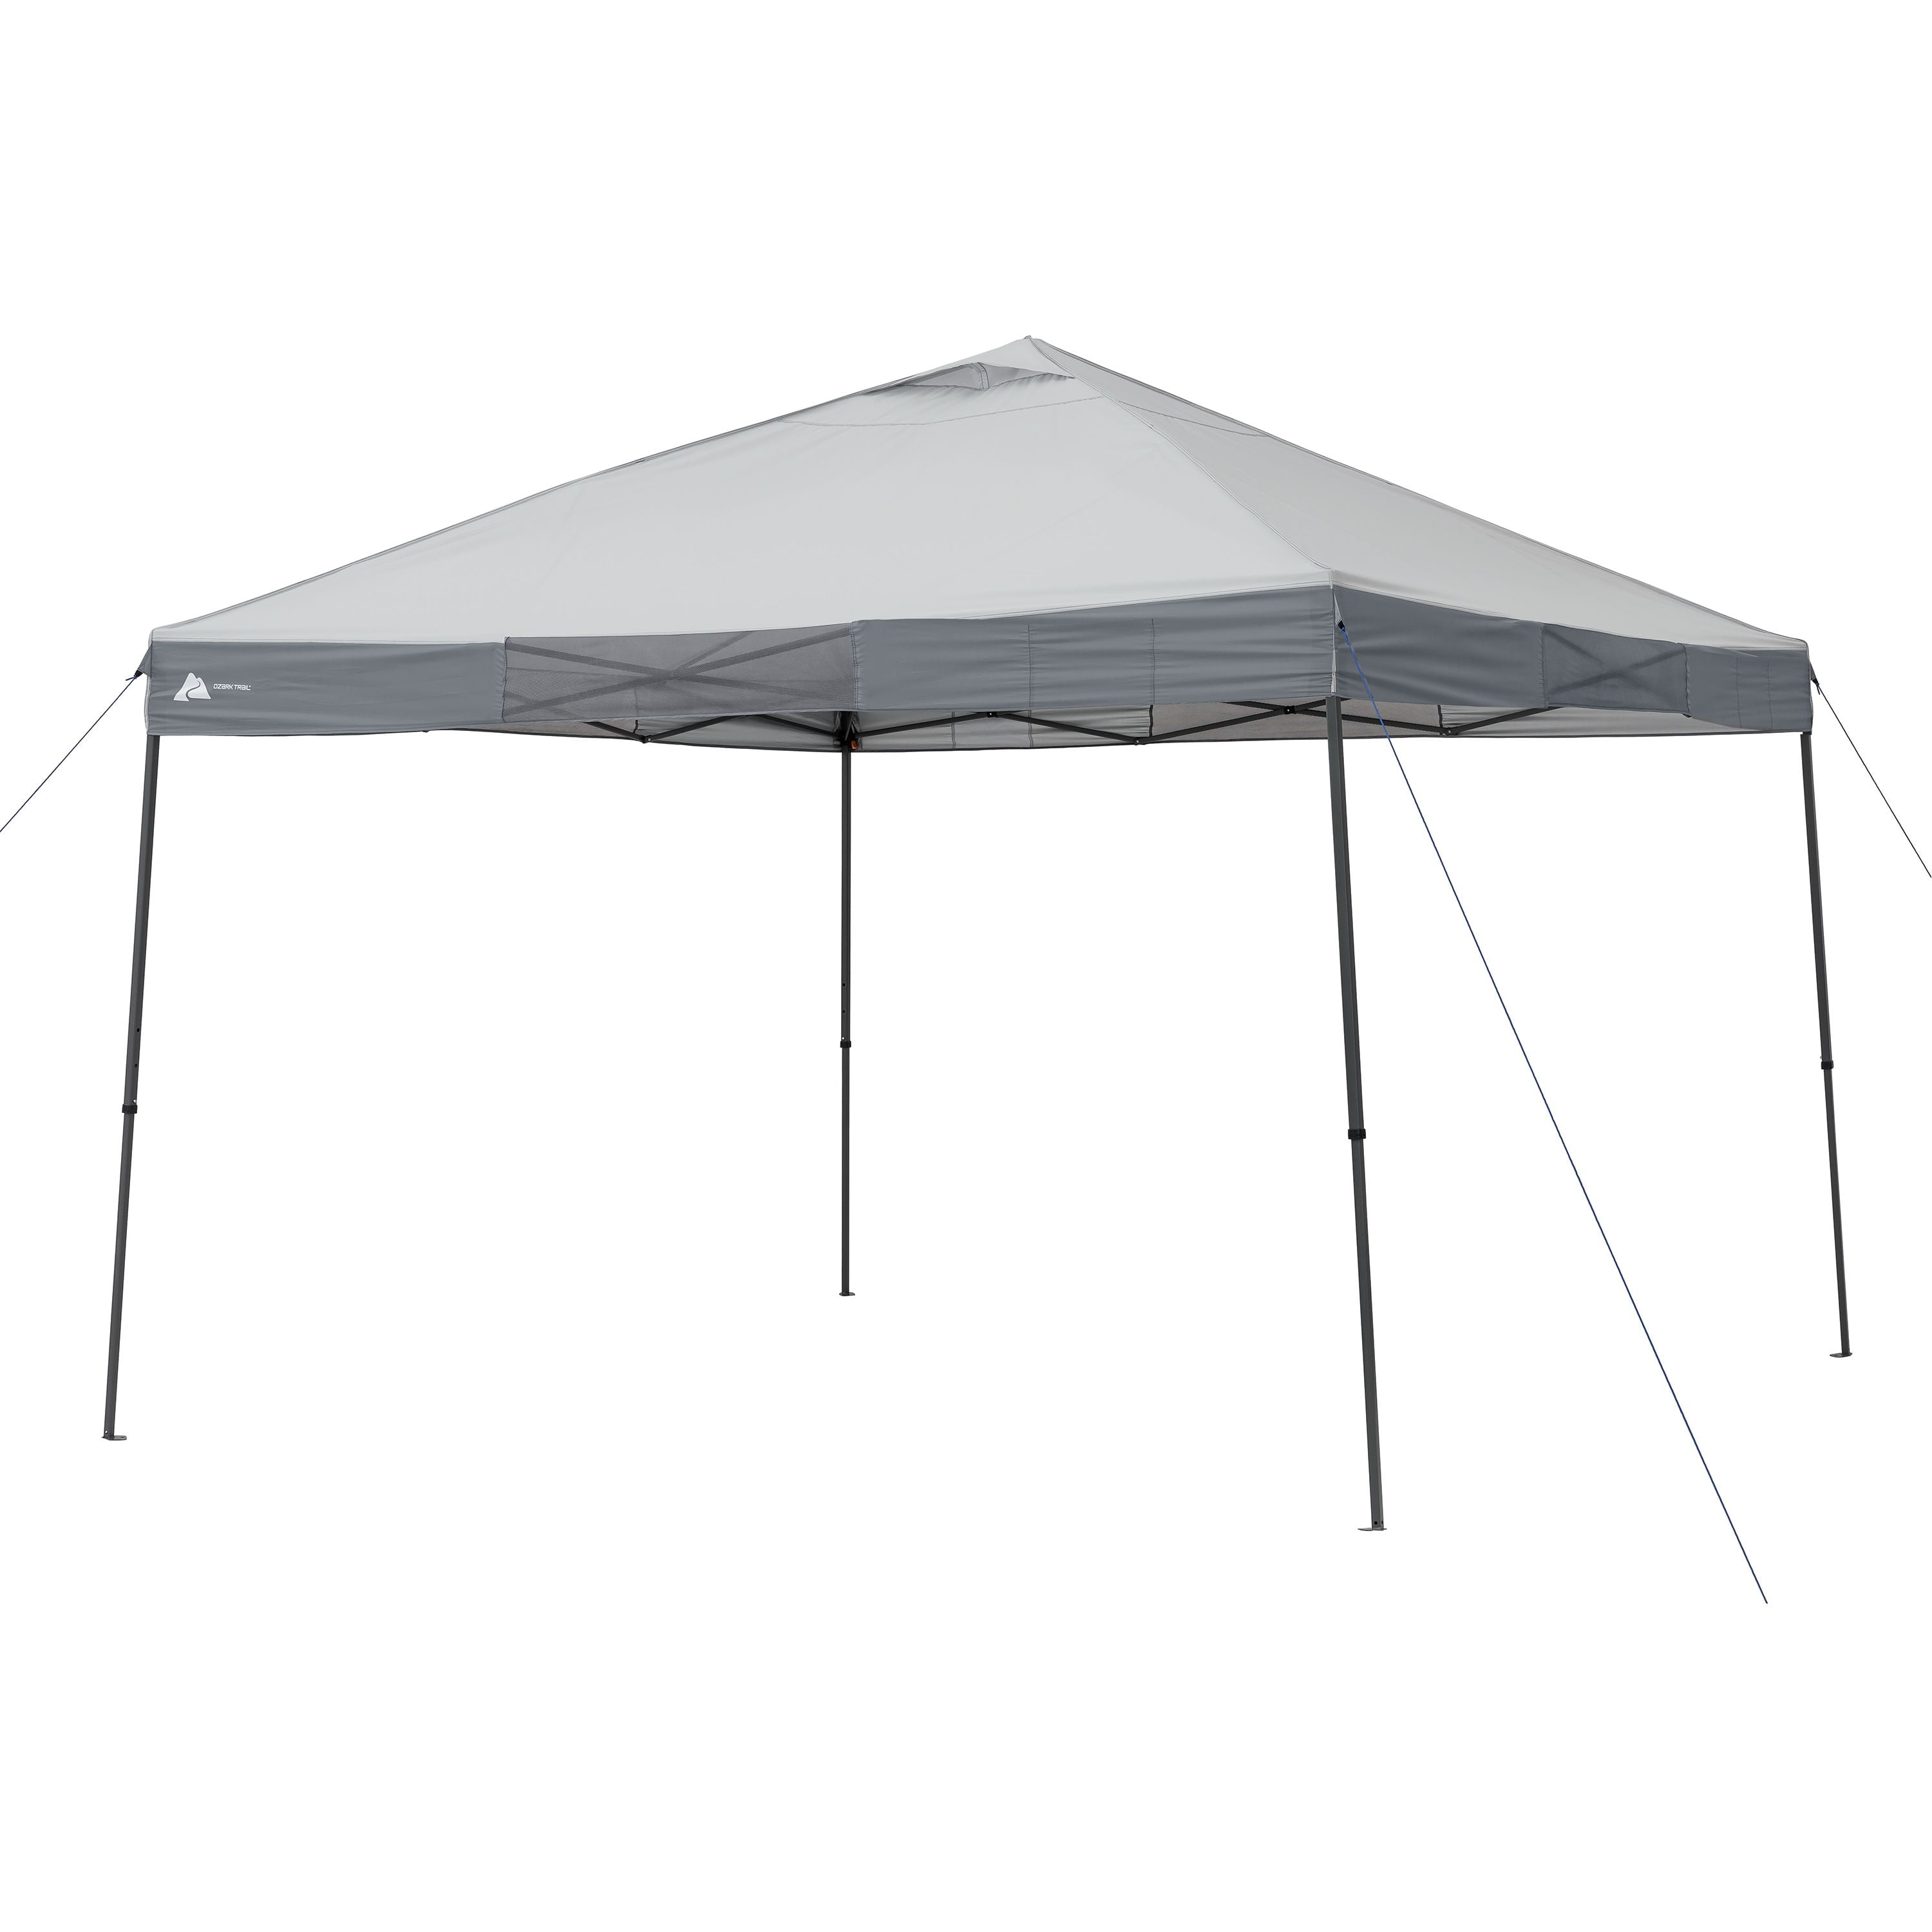 12x12 instant canopy